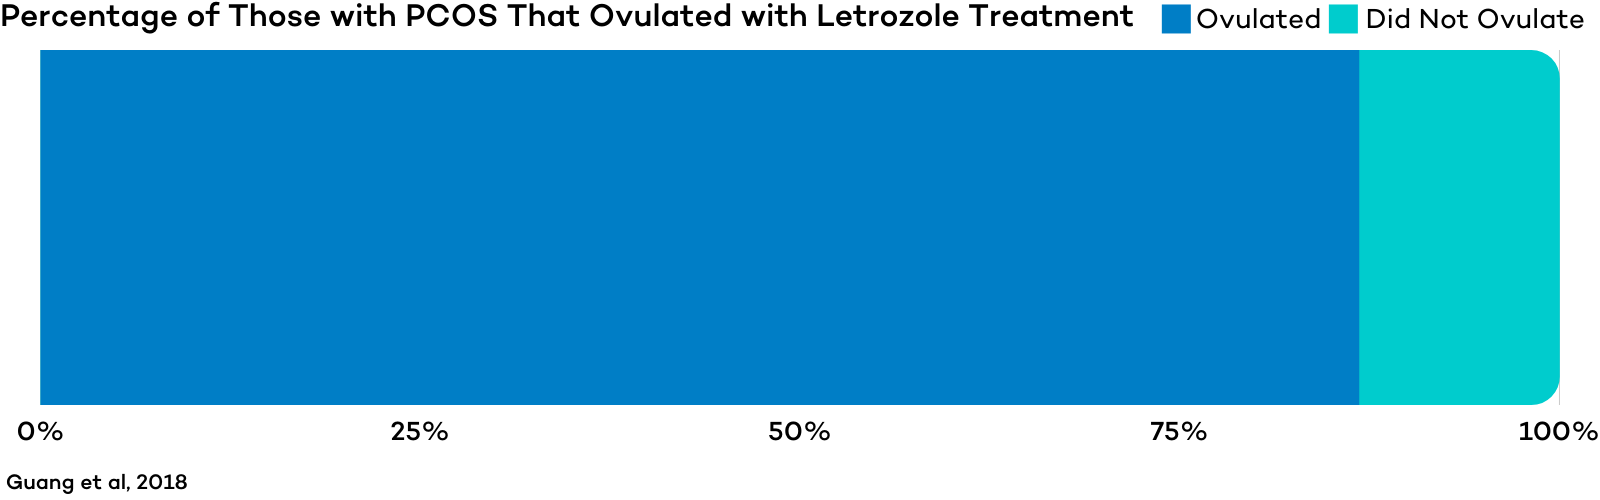 Percentage of Those with PCOS That Ovulated with Letrozole Treatment